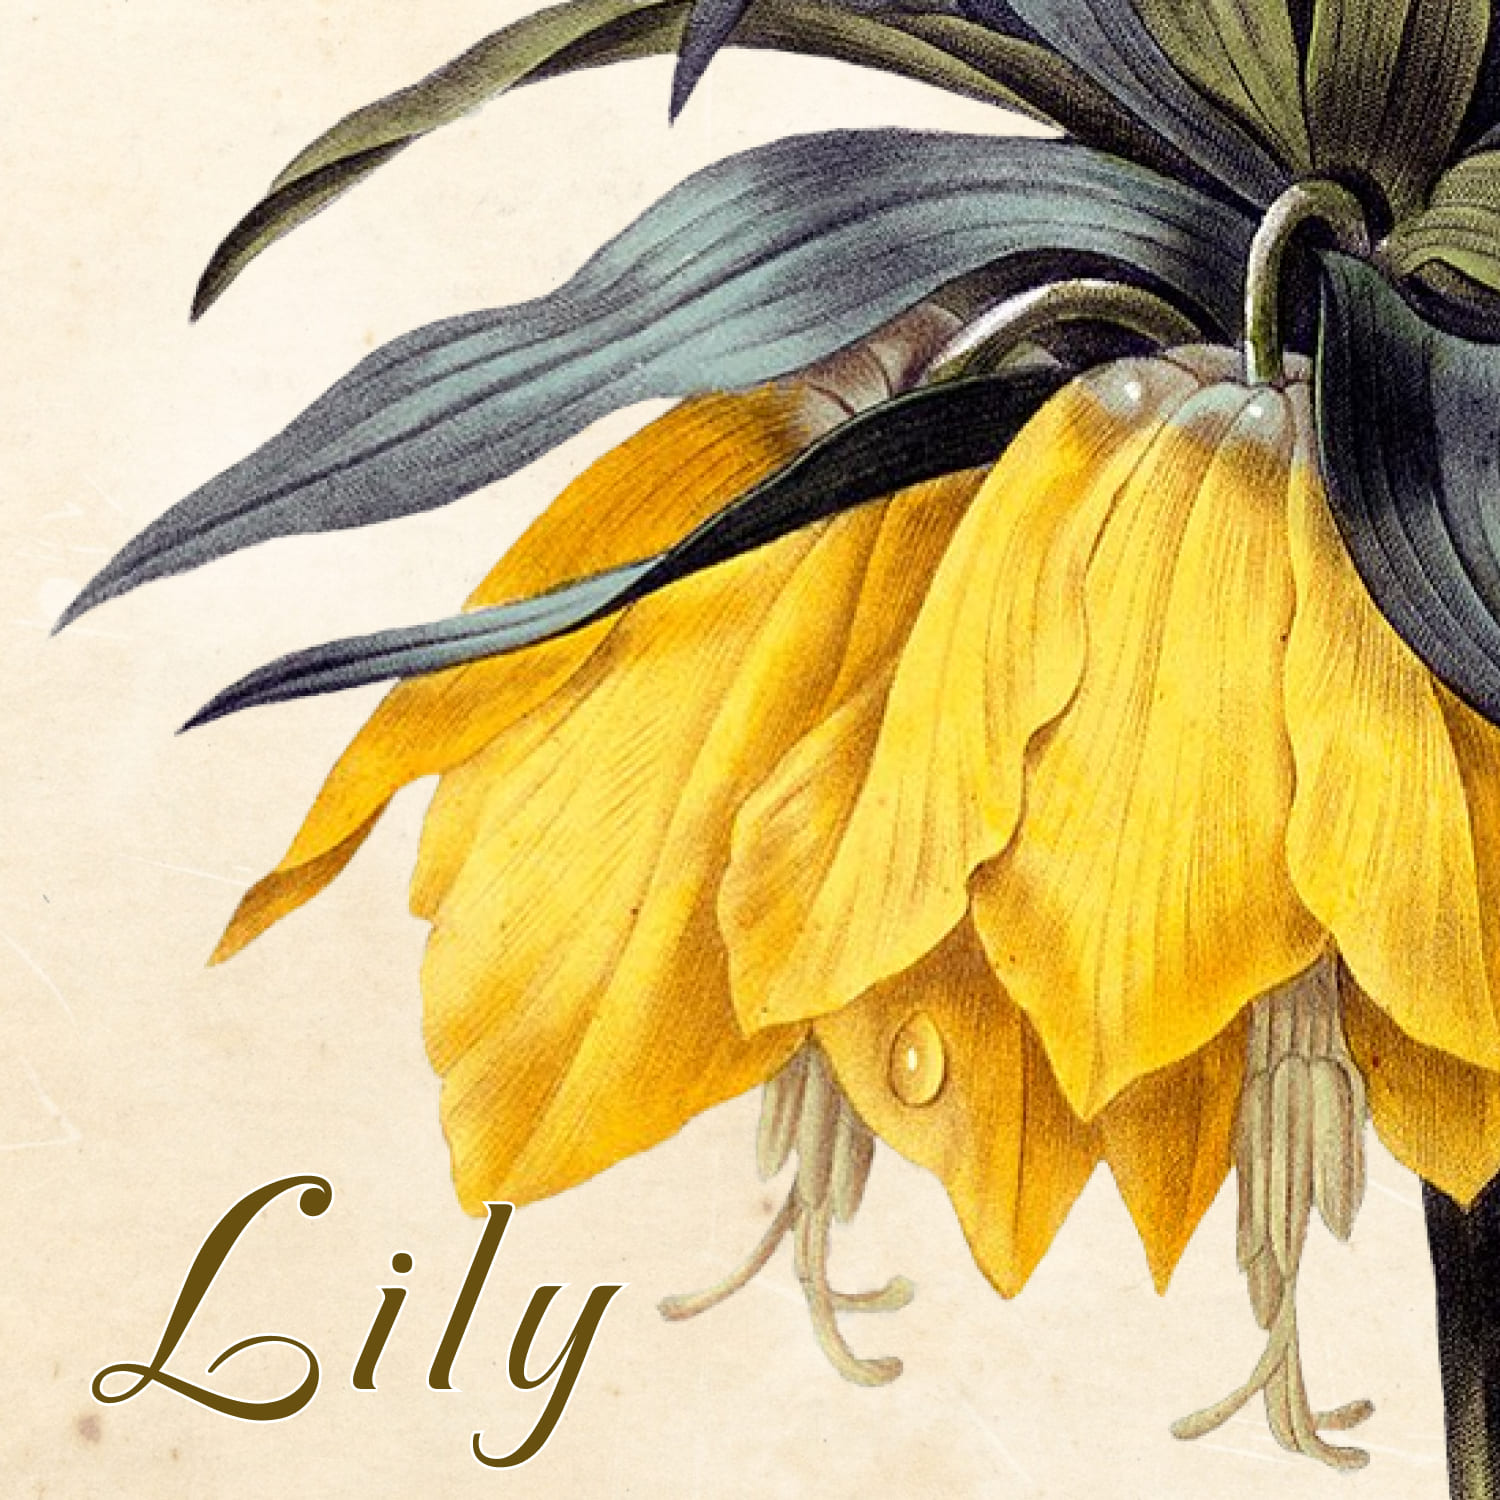 These fabulous lily clipart have come from a book published in the 1800’s.